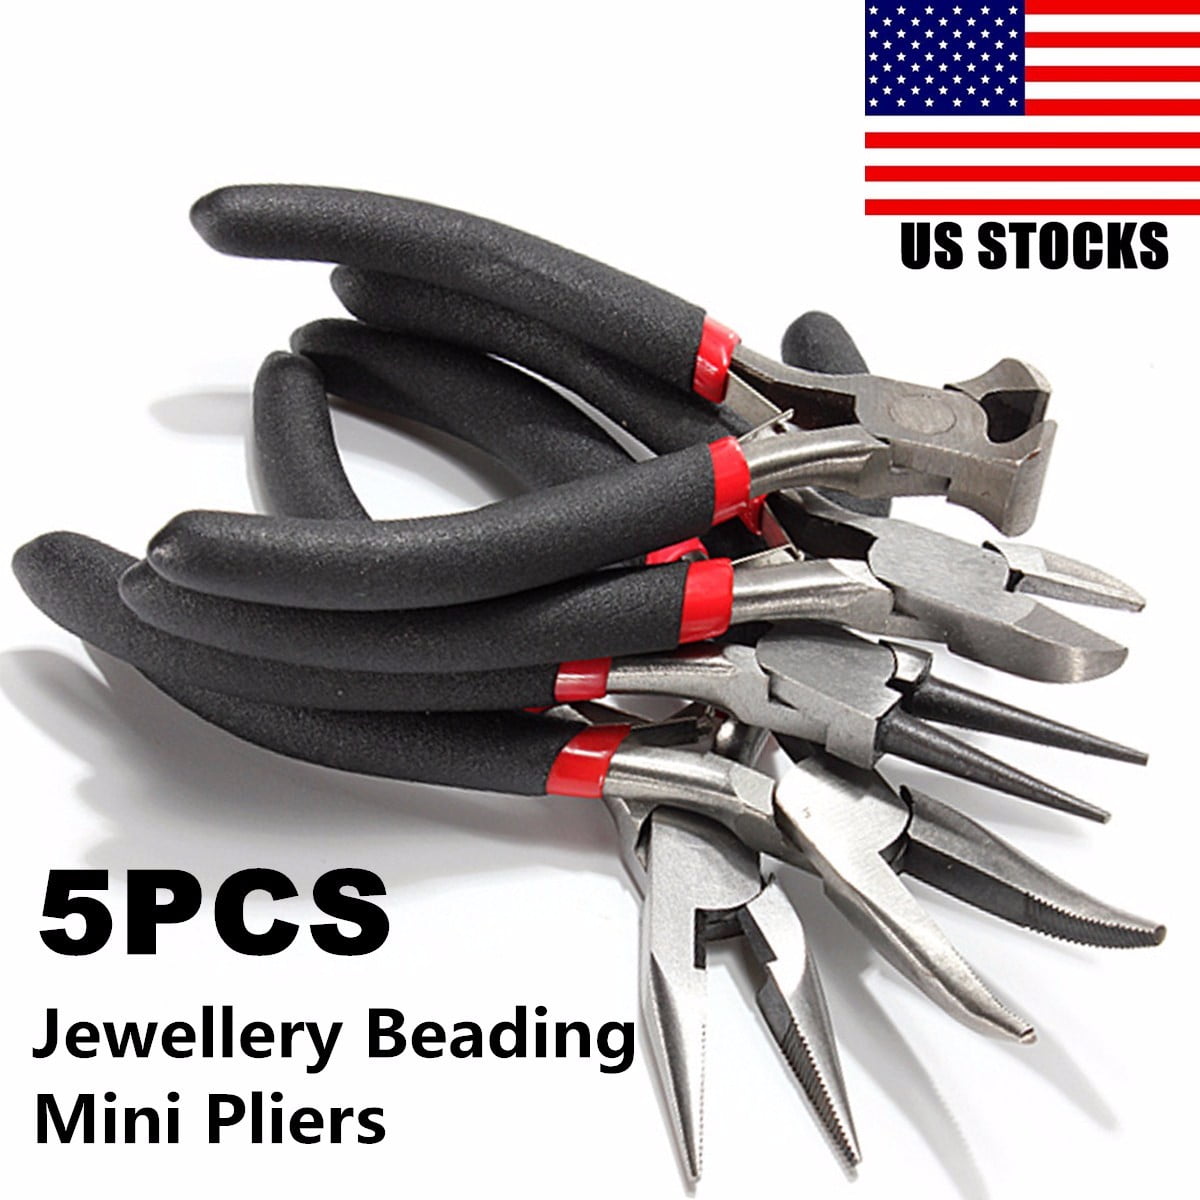 Multi-Purpose Jewelry Mini Pliers Tools Cutter Chain Round Bent Nose DIY Beading 